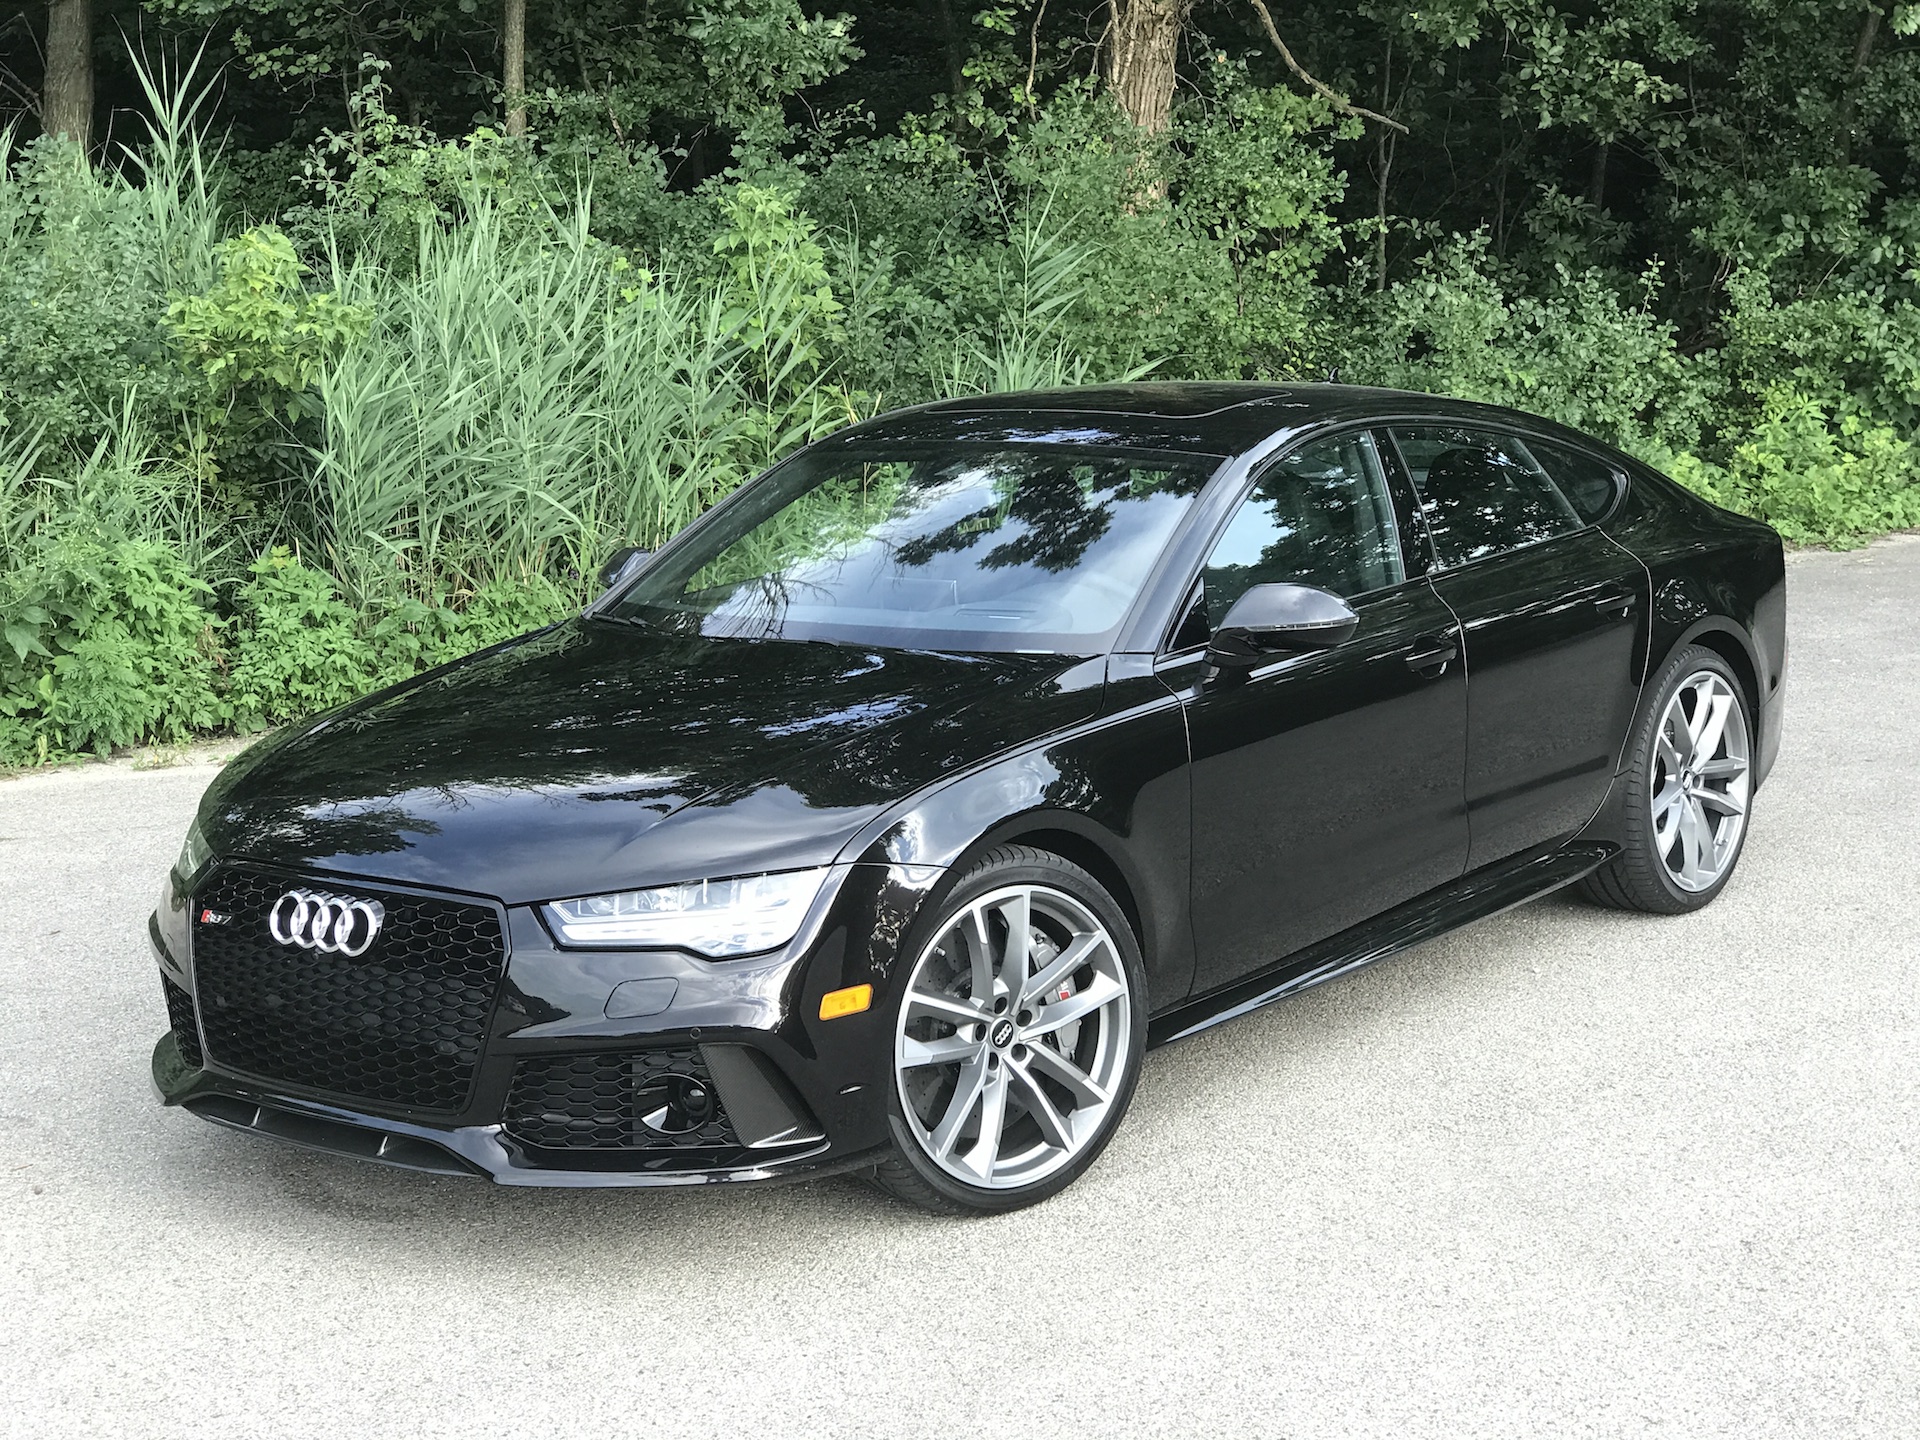 2017 Audi RS 7 Performance first drive review: living with a $137K hatchback